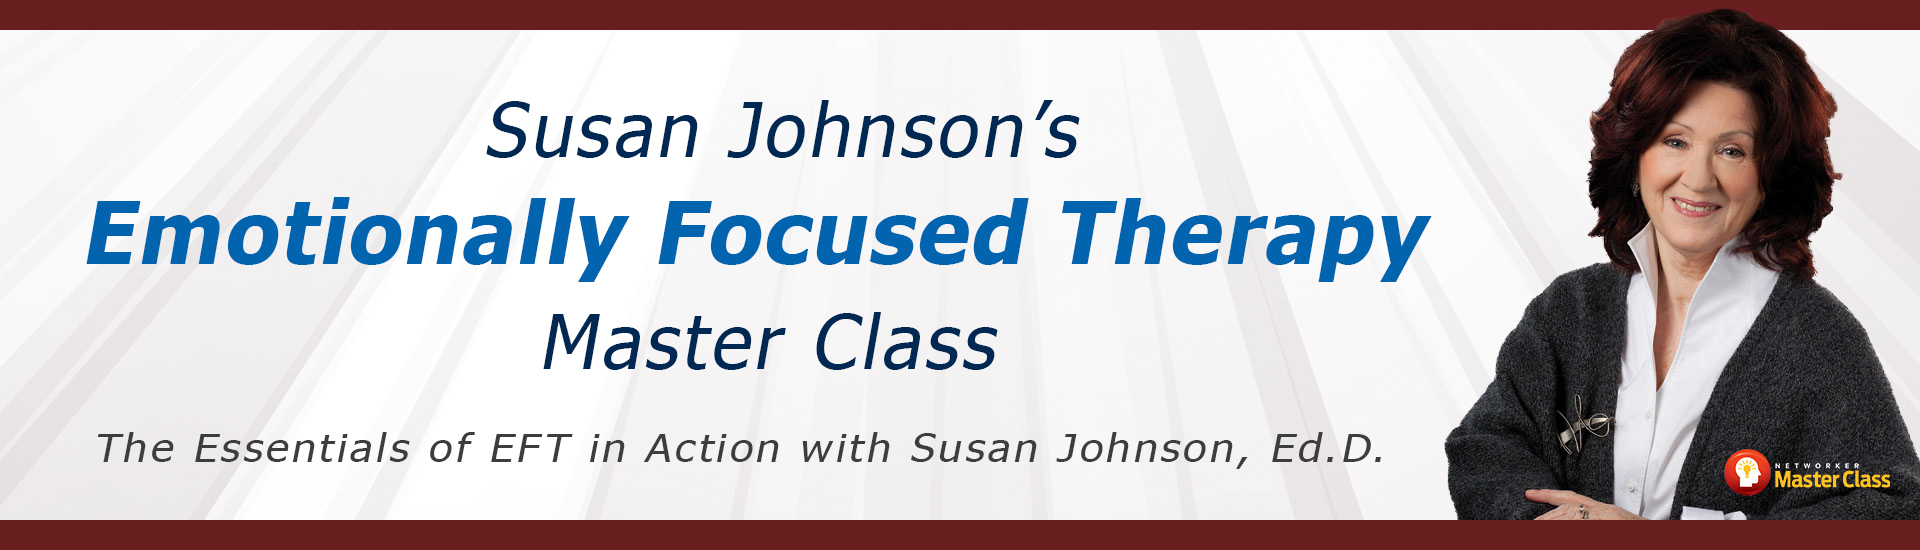 Susan Johnson's Emotionally Focused Therapy Master Class: The Essentials of EFT in Action